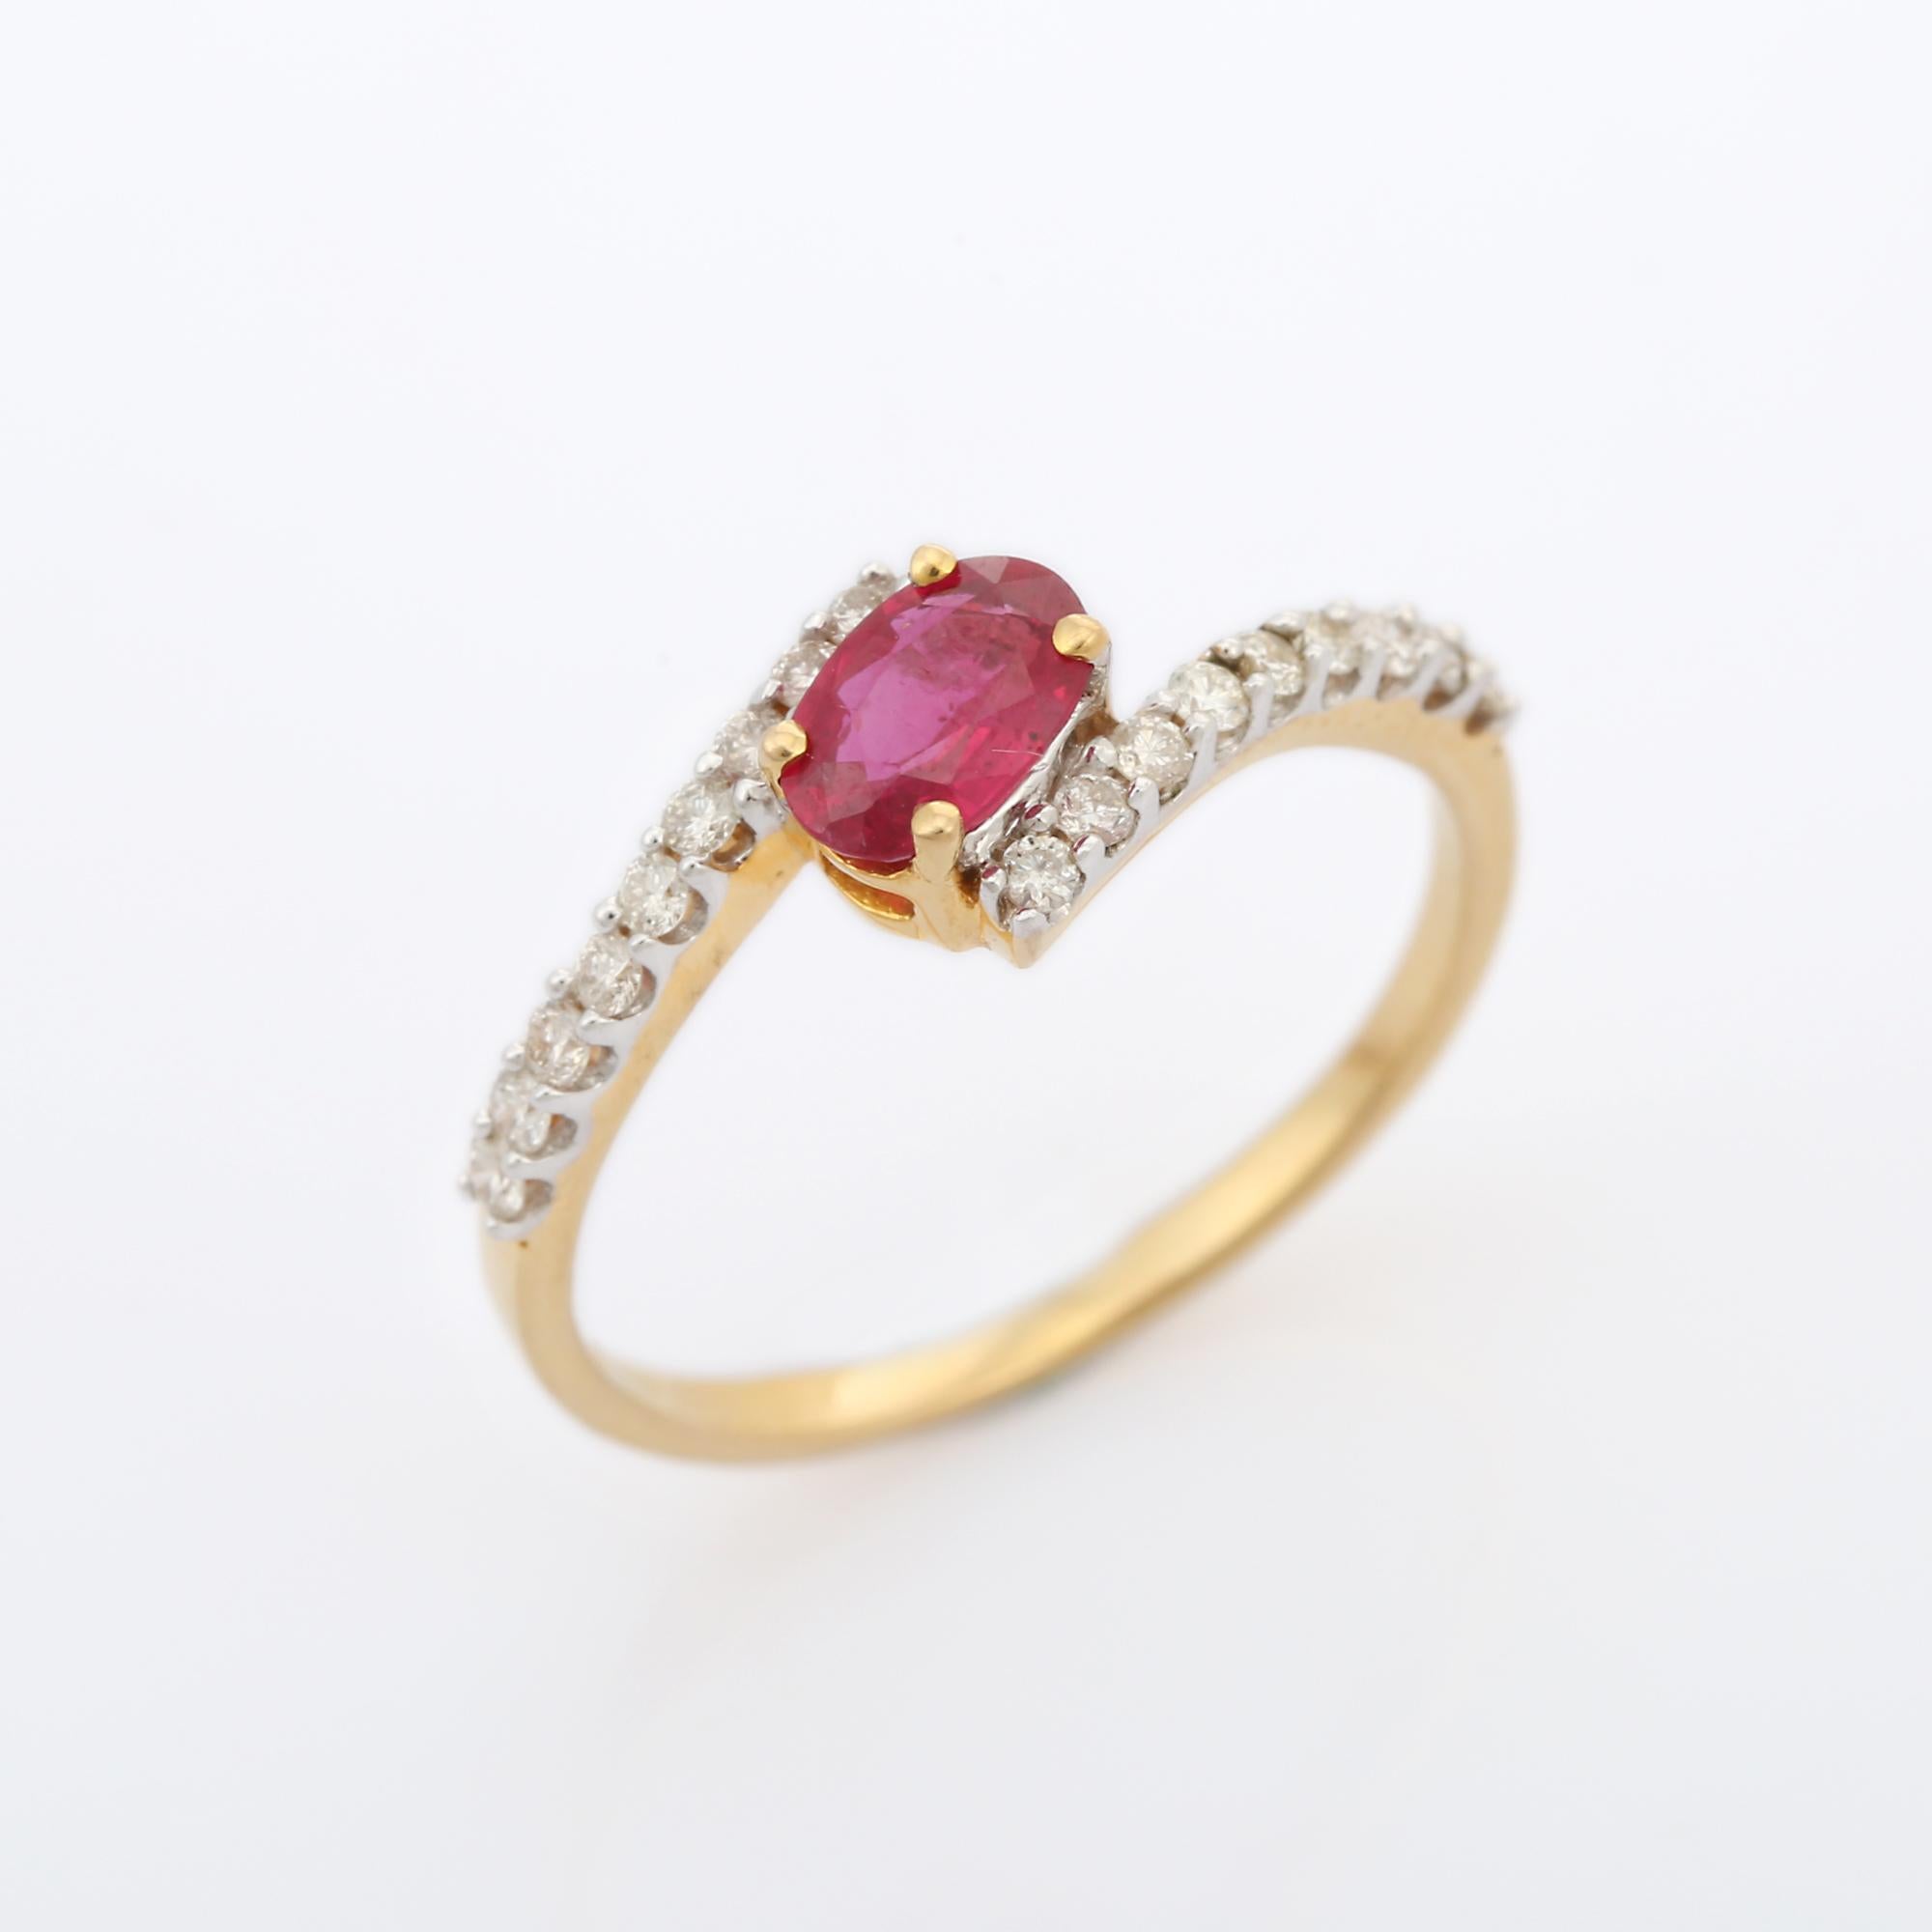 For Sale:  Designer Natural Diamond and Ruby Ring in Solid 18k Yellow Gold 5